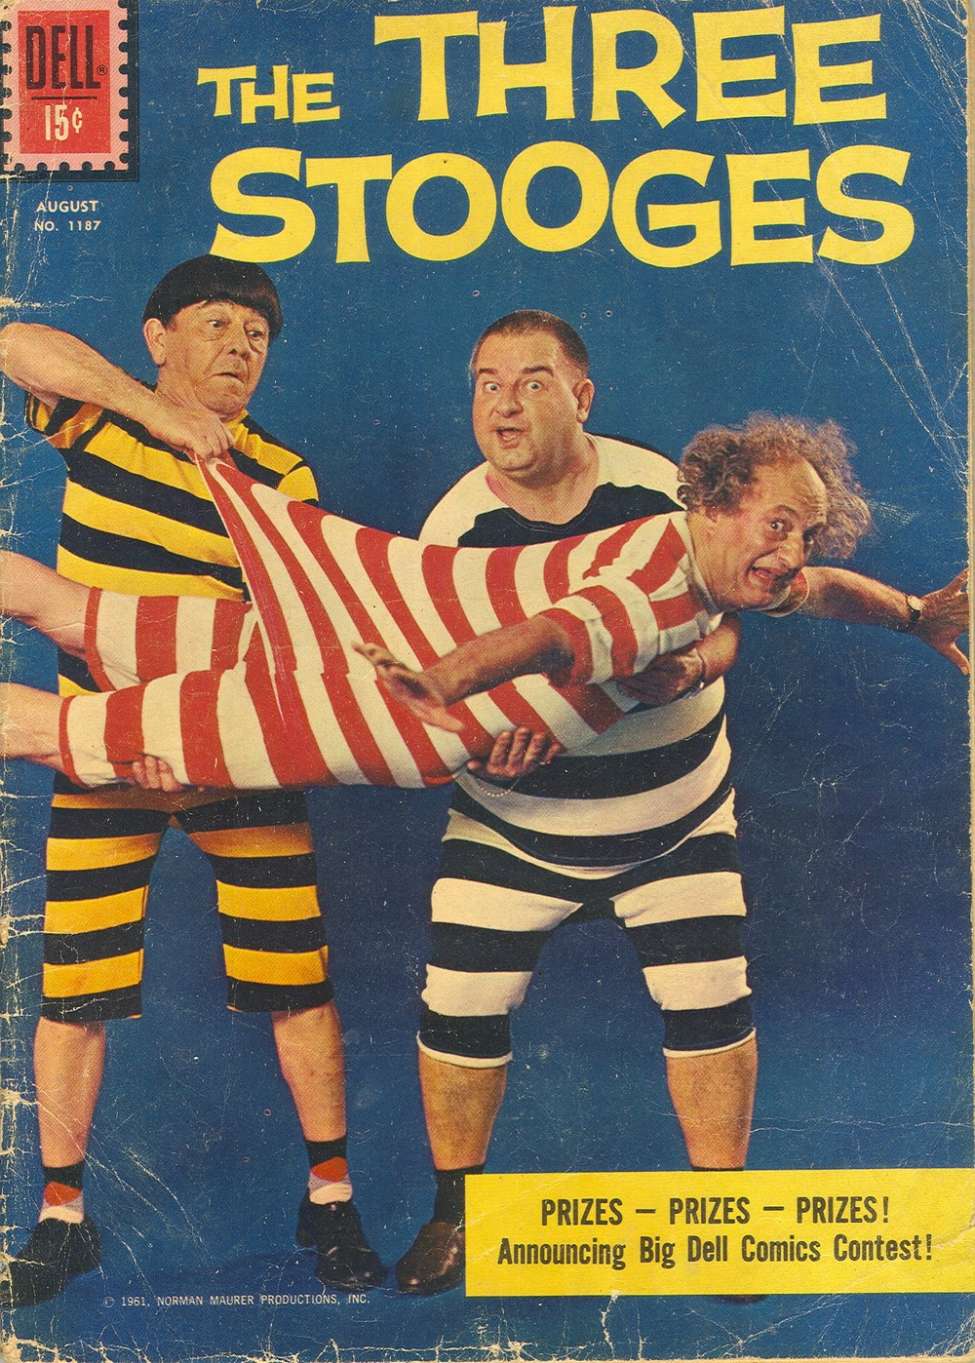 Book Cover For 1187 - The Three Stooges